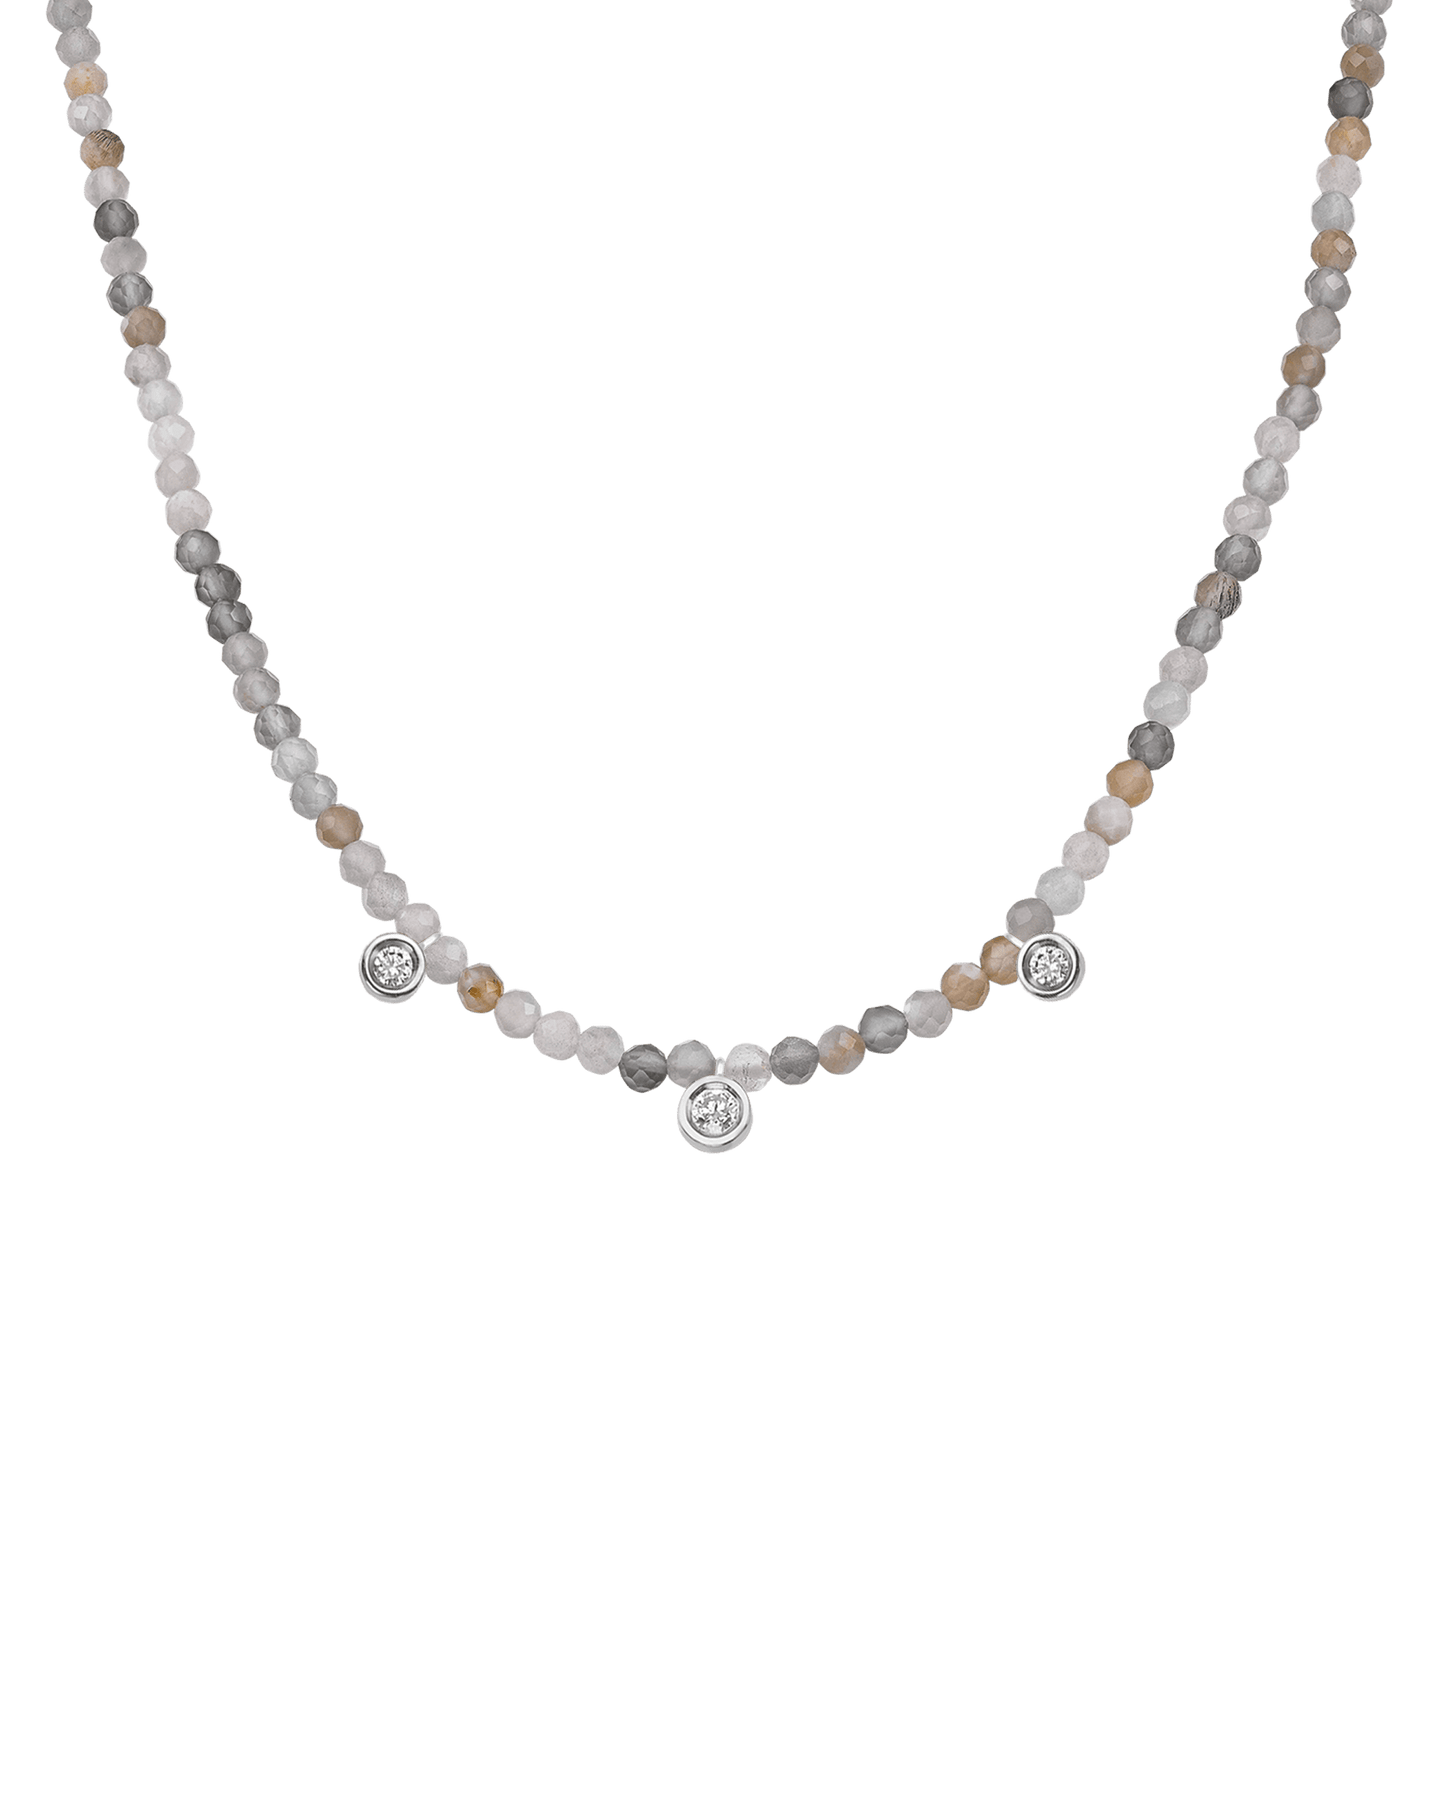 Black Spinel Gemstone & Three diamonds Necklace - 14K White Gold Necklaces magal-dev Natural Moonstone 14" - Collar 